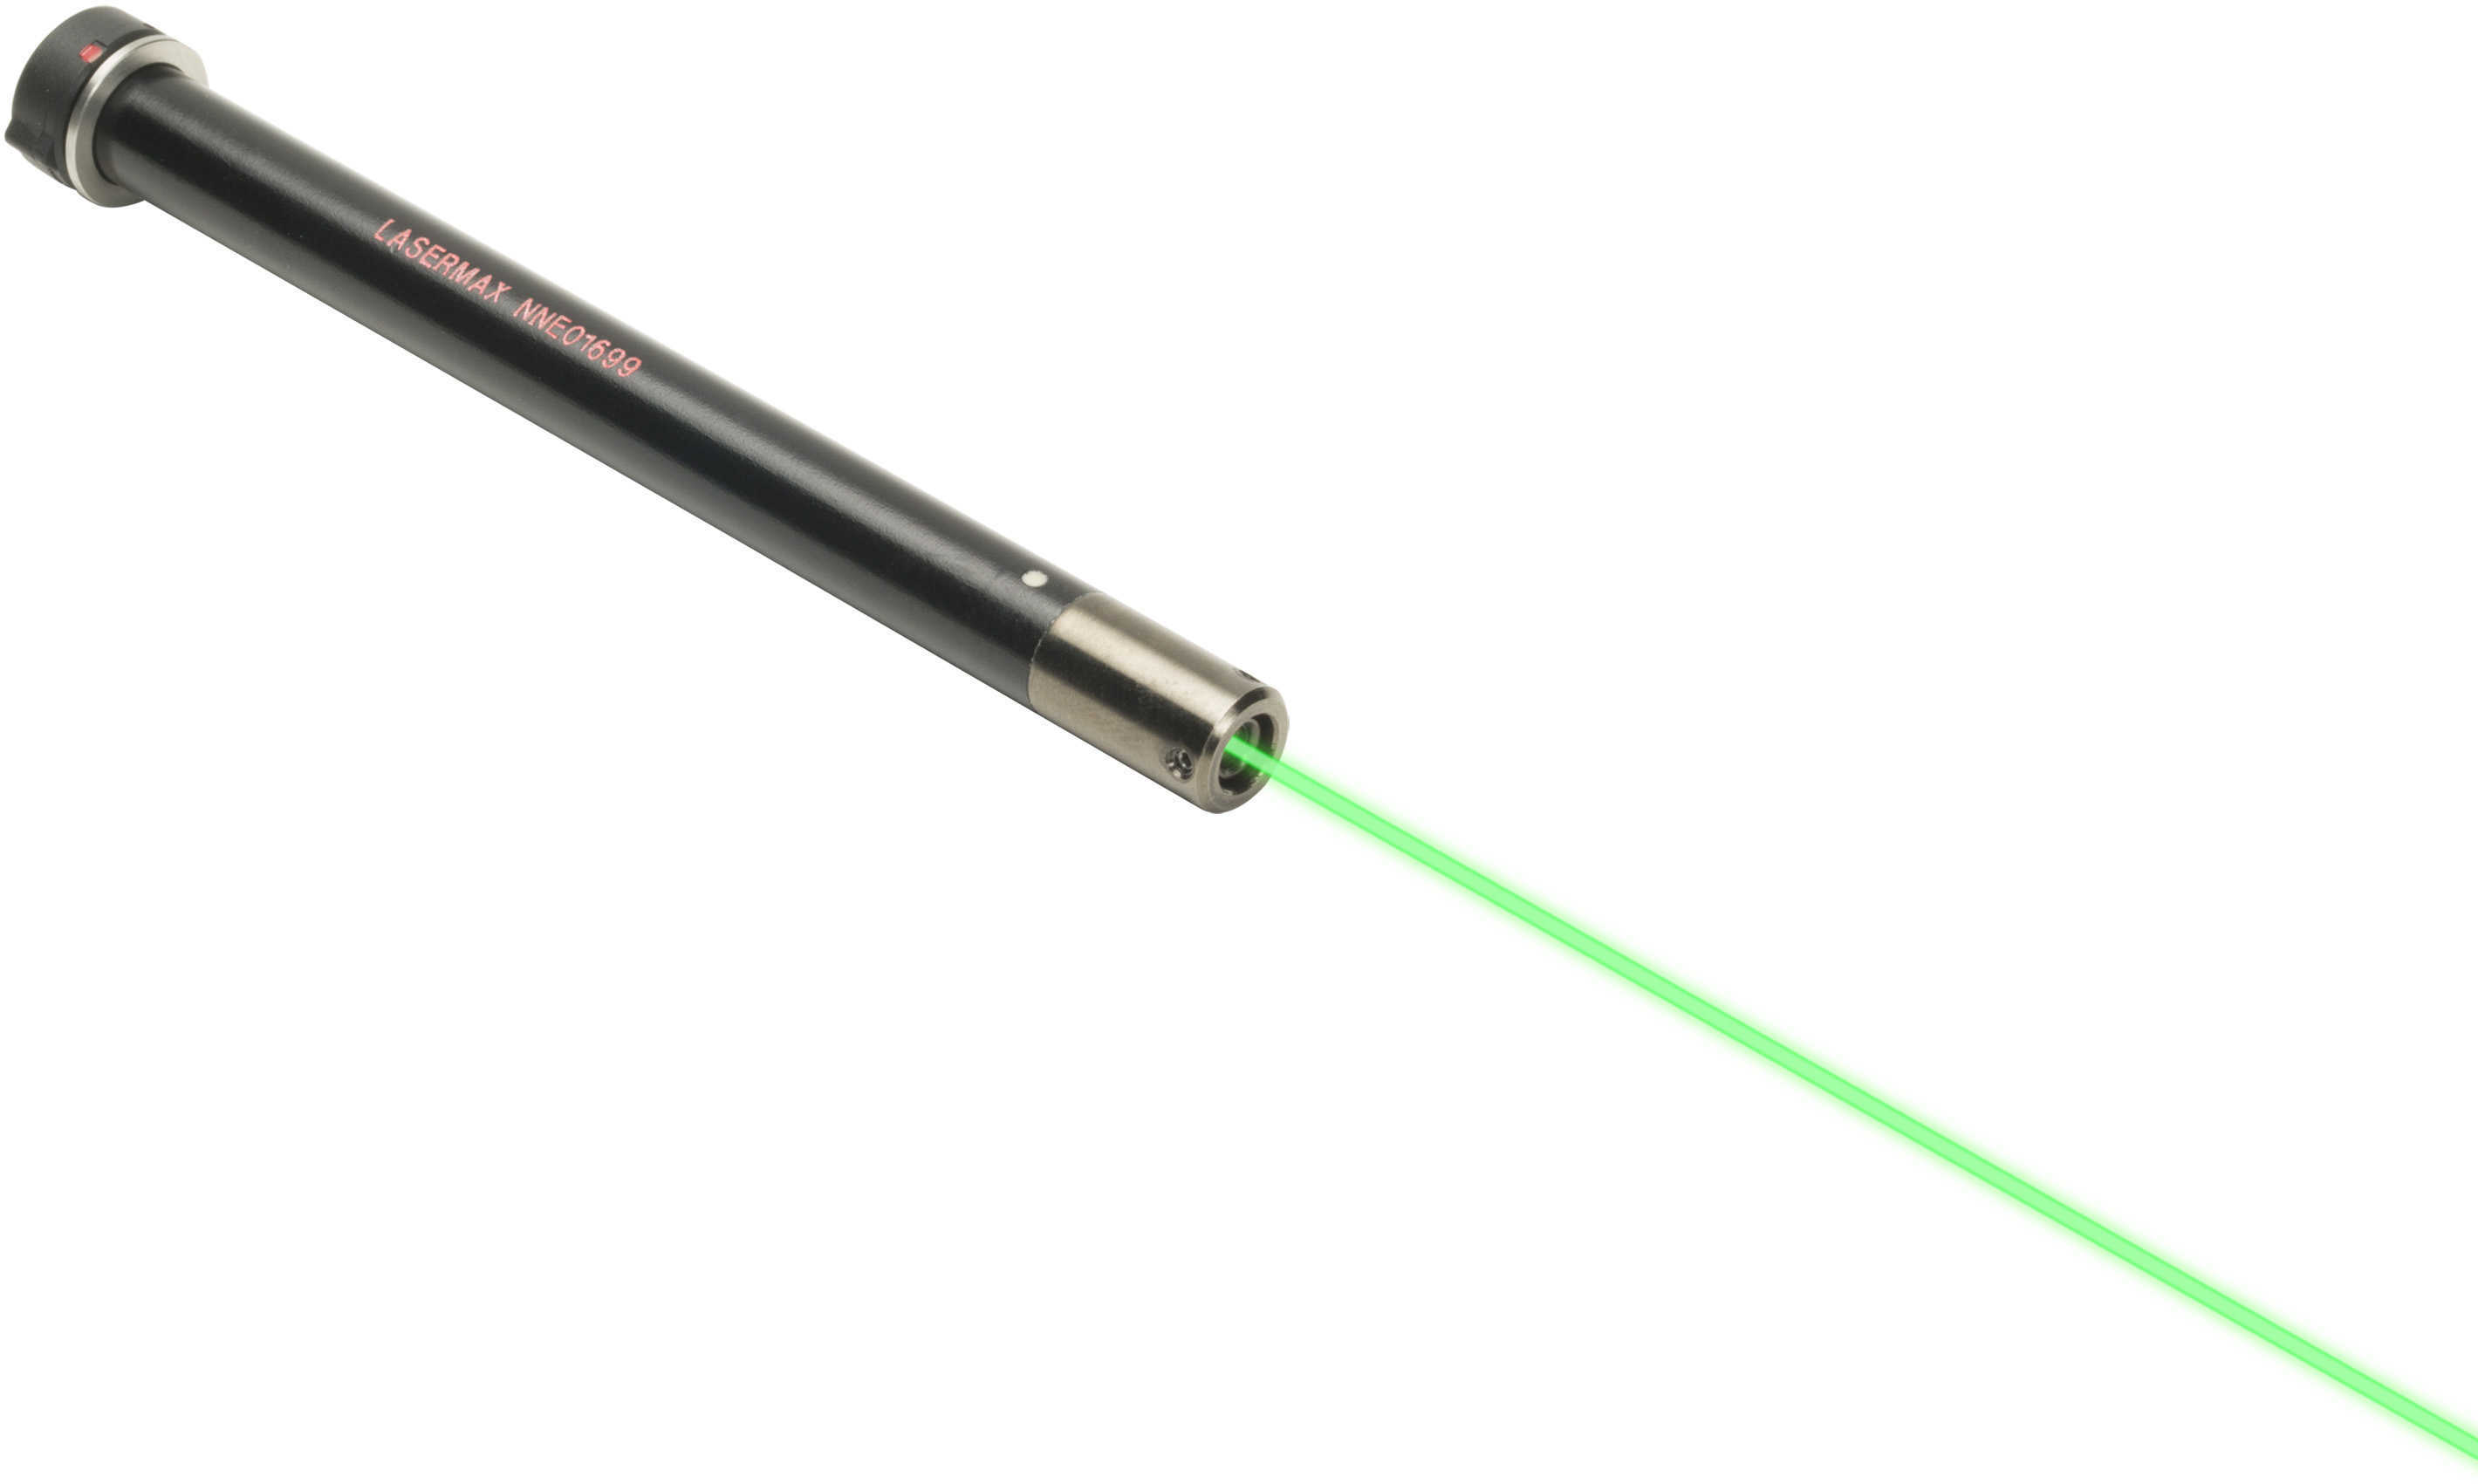 Lasermax Guide Rod For Glock 17 22 31 And 37 (Gen1-3) - Green